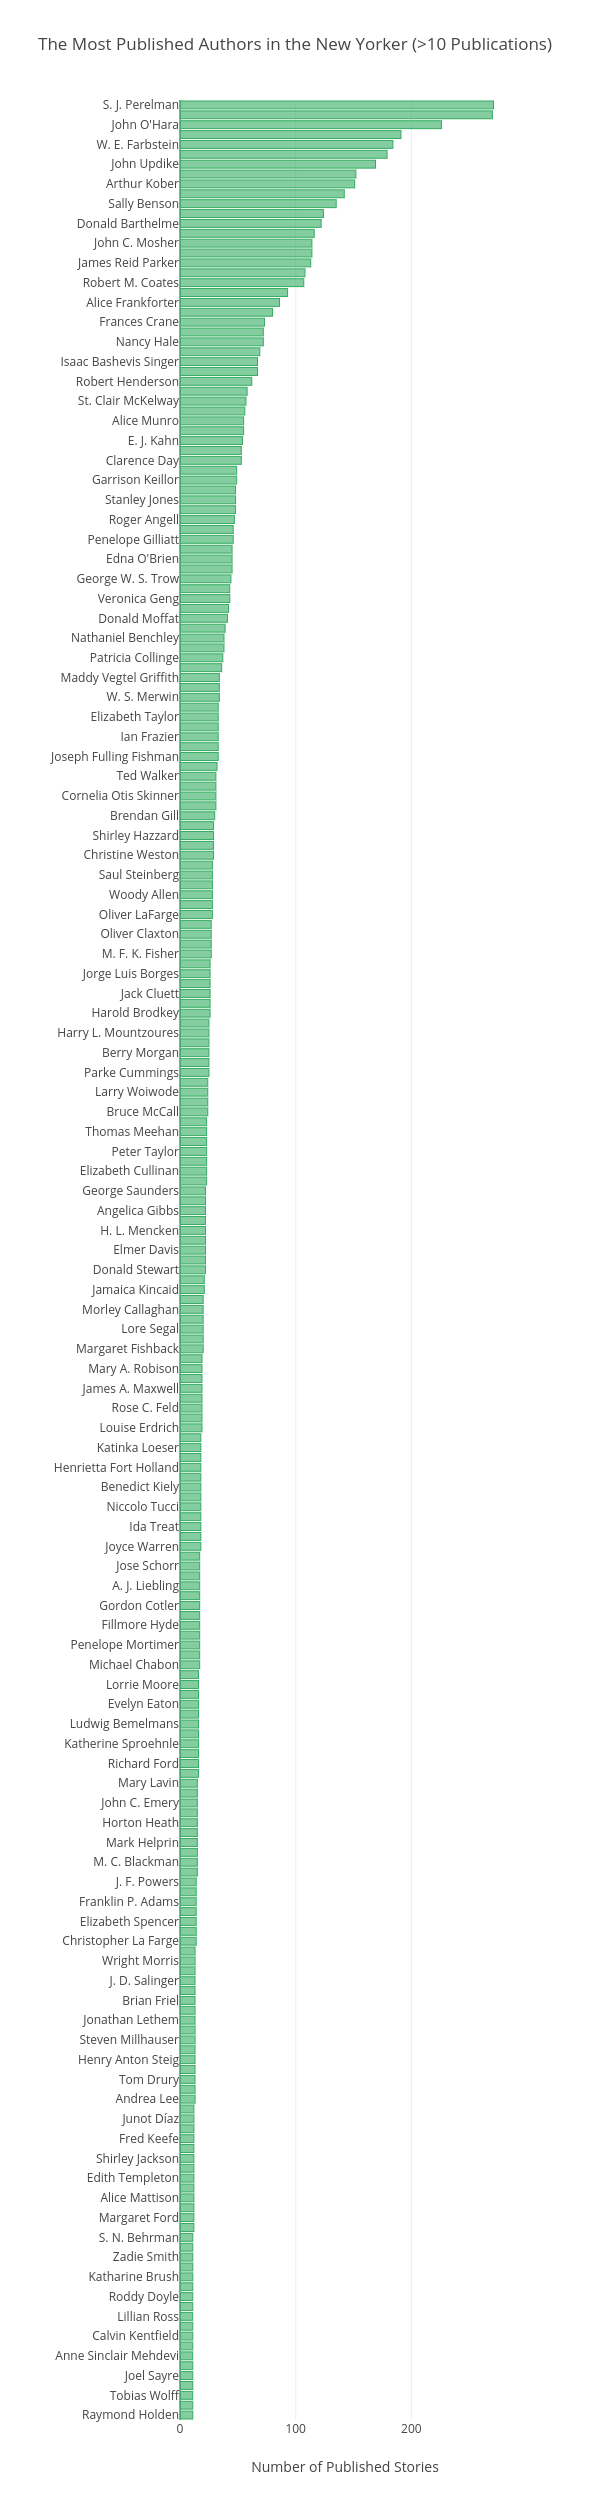 The Most Published Authors in the New Yorker (>10 Publications) | bar chart made by Joshua-t-loong | plotly